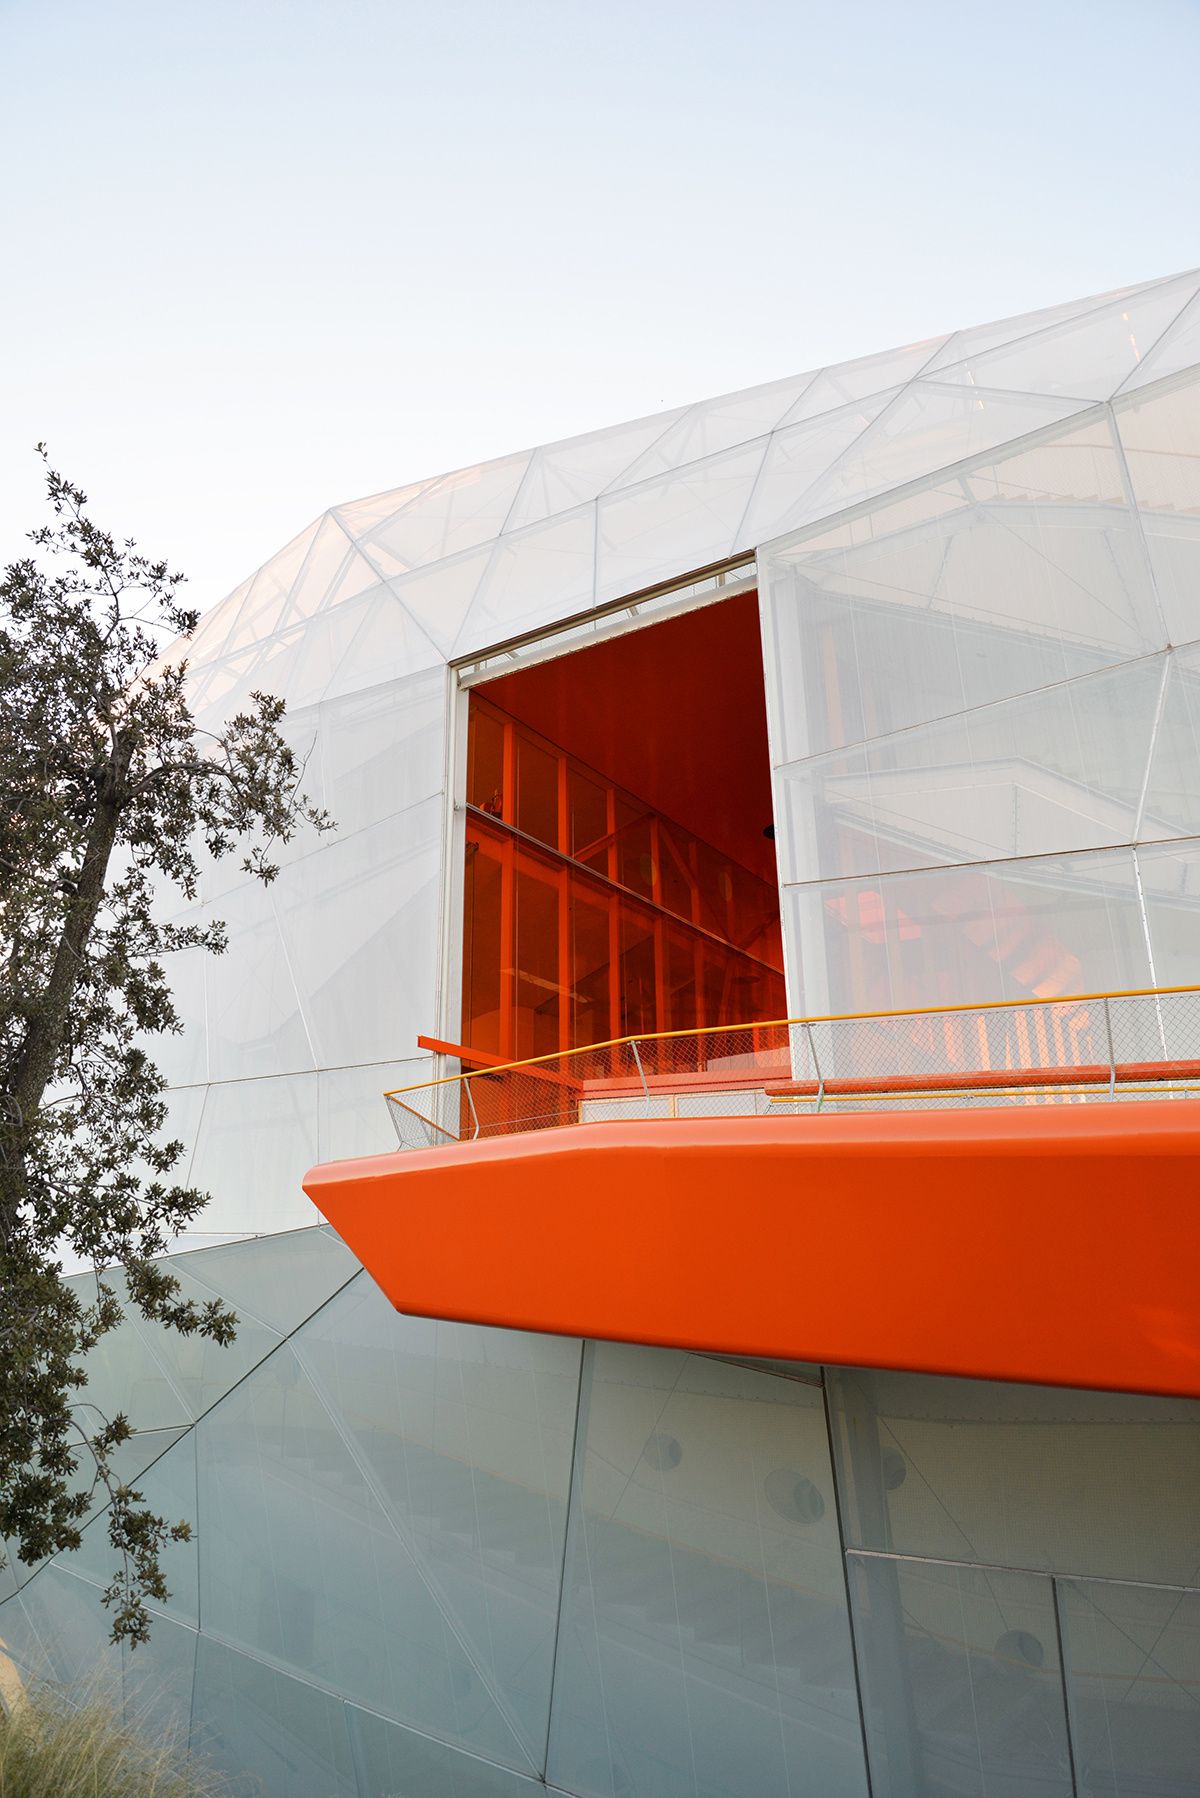 The main entrance to the new Plasencia Conference Center and Auditórium, as accessed by a bright orange walkway.